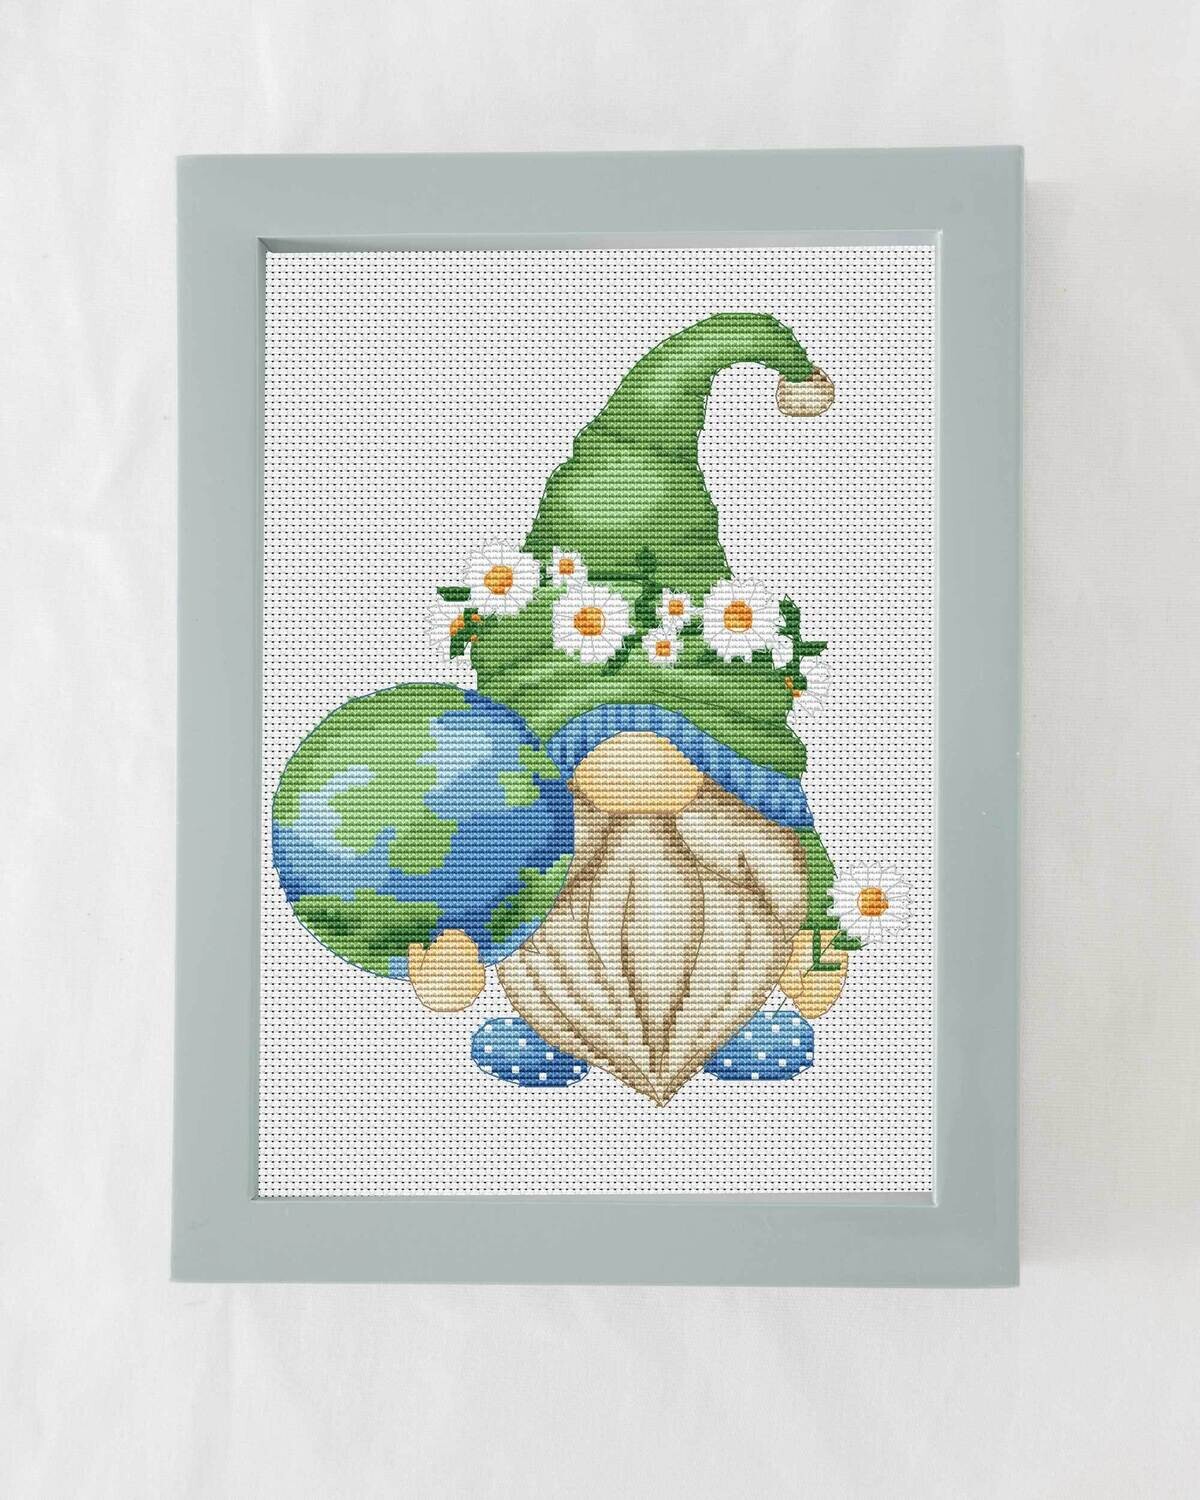 Mother earth day, Gnome cross stitch, Earth cross stitch, Counted cross stitch, Save nature